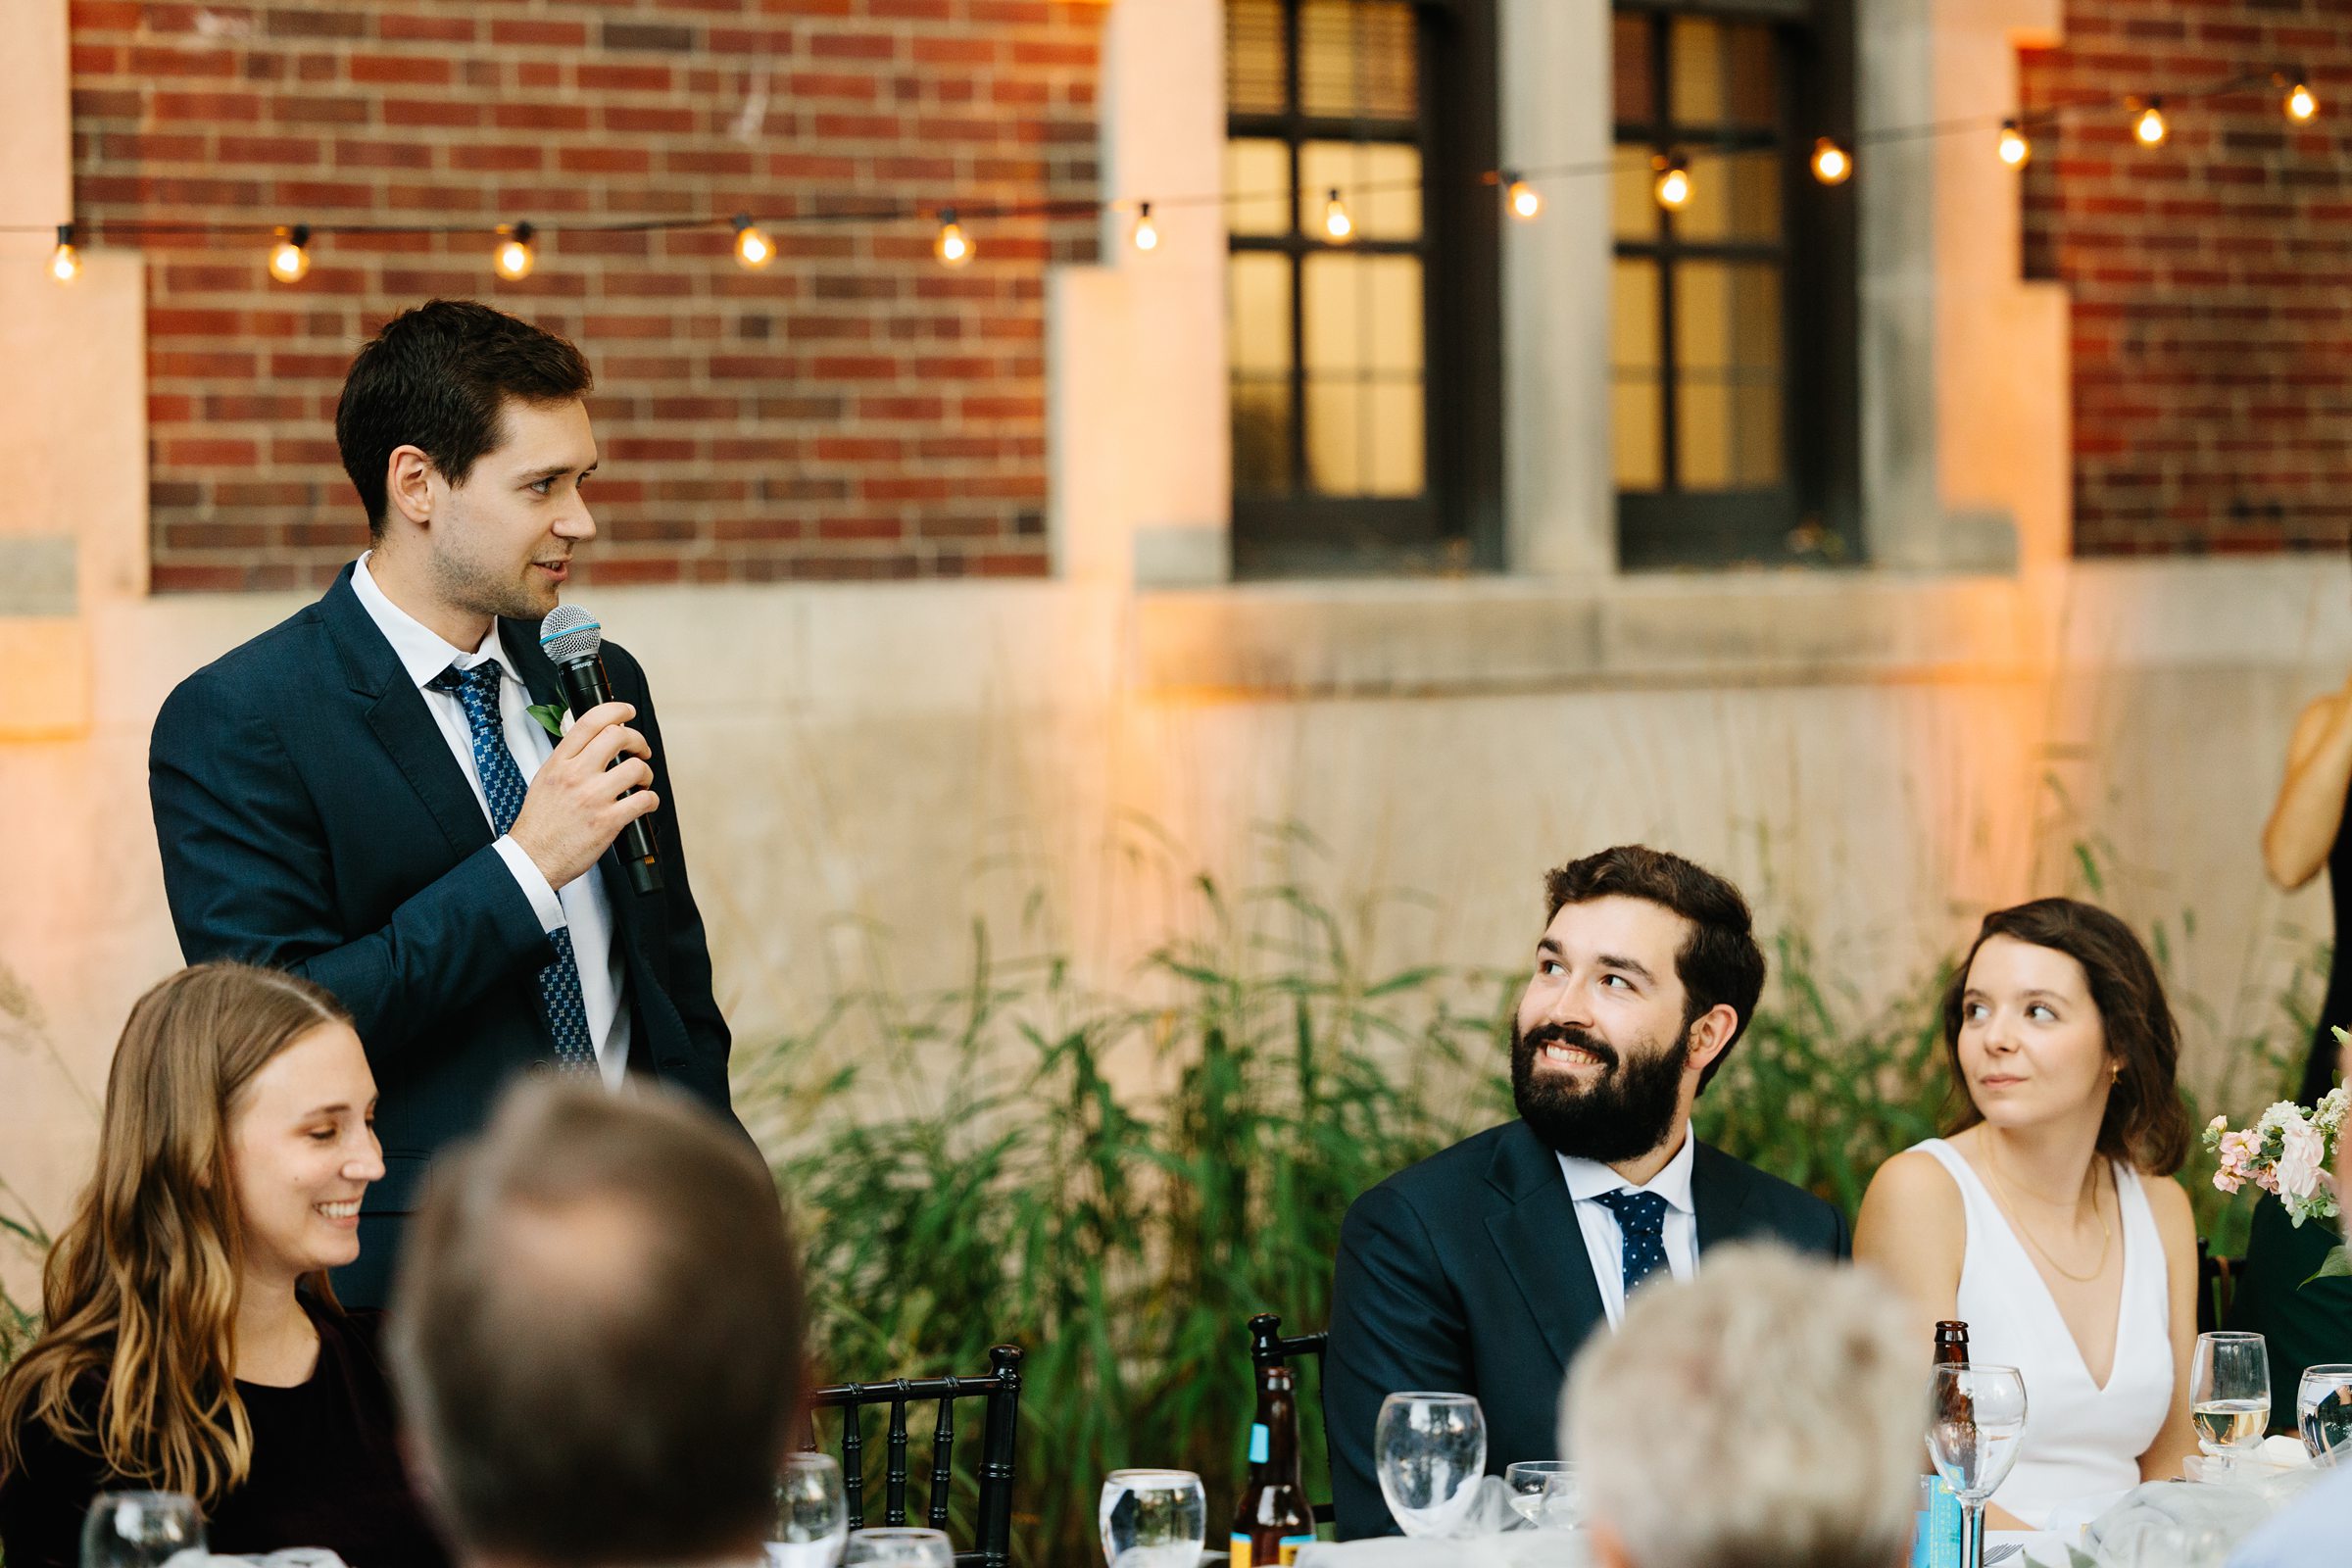 Groomsmen holds mic and gives his toast while bride and groom smile during their outdoor wedding reception under cafe lights by Detroit Wedding Photographer Michele Maloney